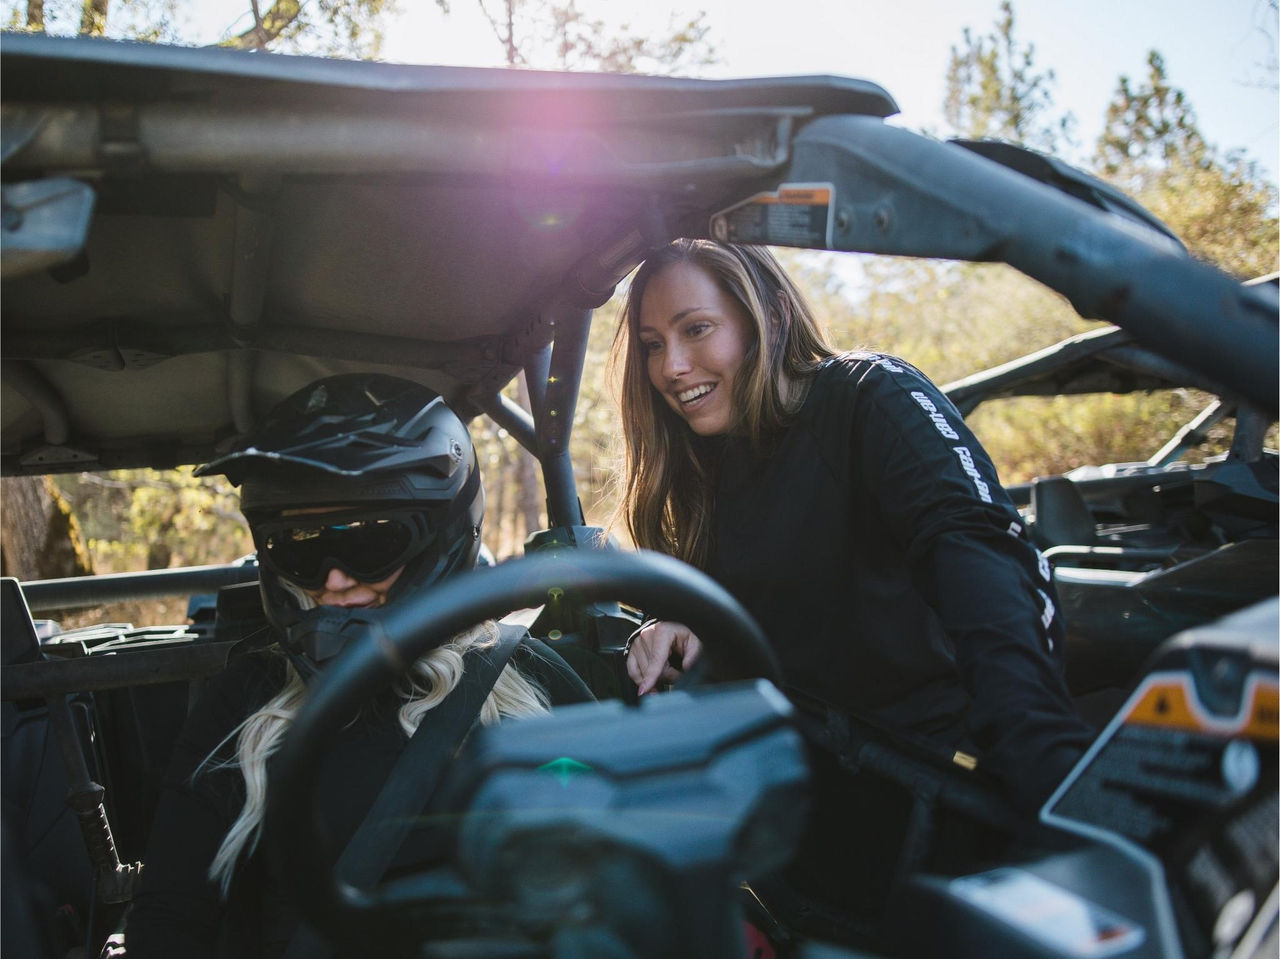 Women-only off-road SxS tour of iconic Yosemite, near Oakhurst, CA